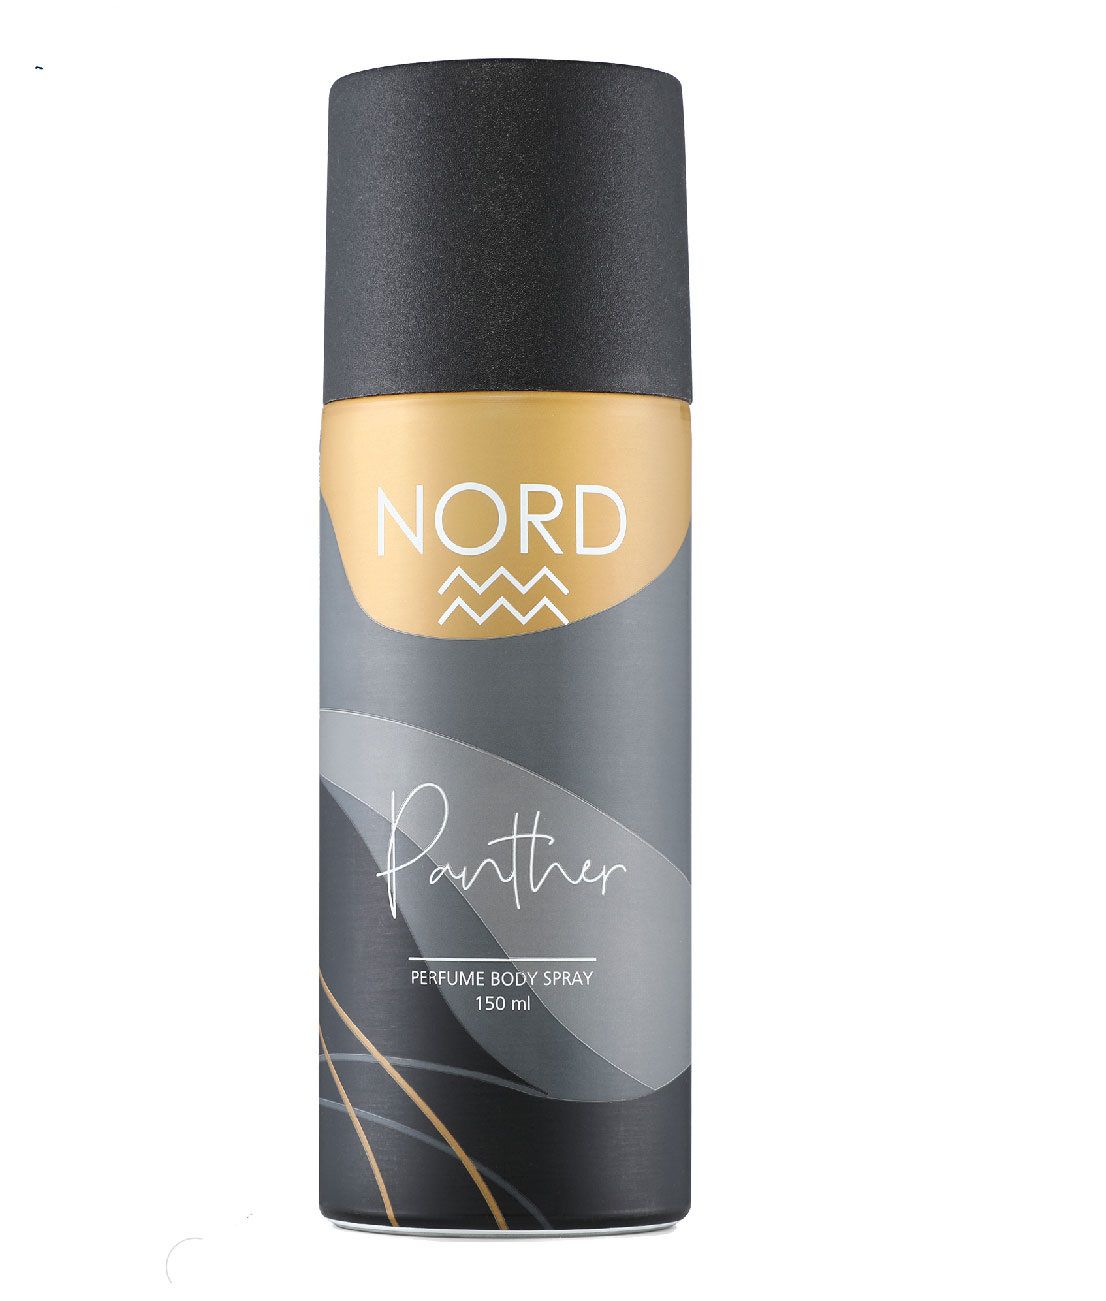     			NORD - Panther Deodorant Spray for Men 150 ml ( Pack of 1 )